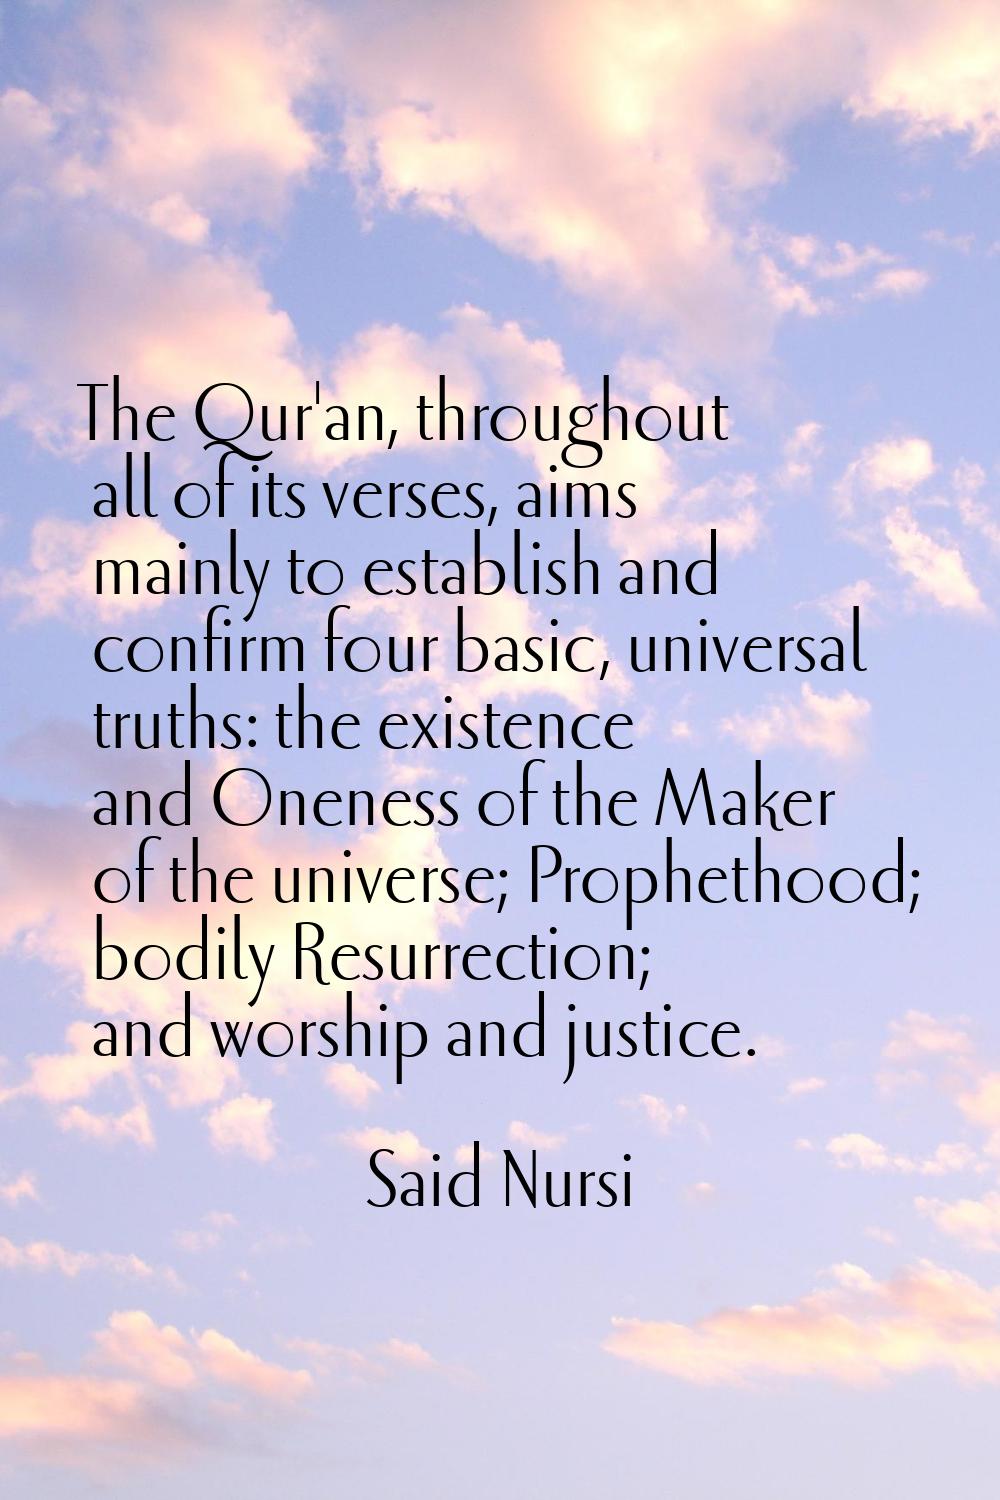 The Qur'an, throughout all of its verses, aims mainly to establish and confirm four basic, universa